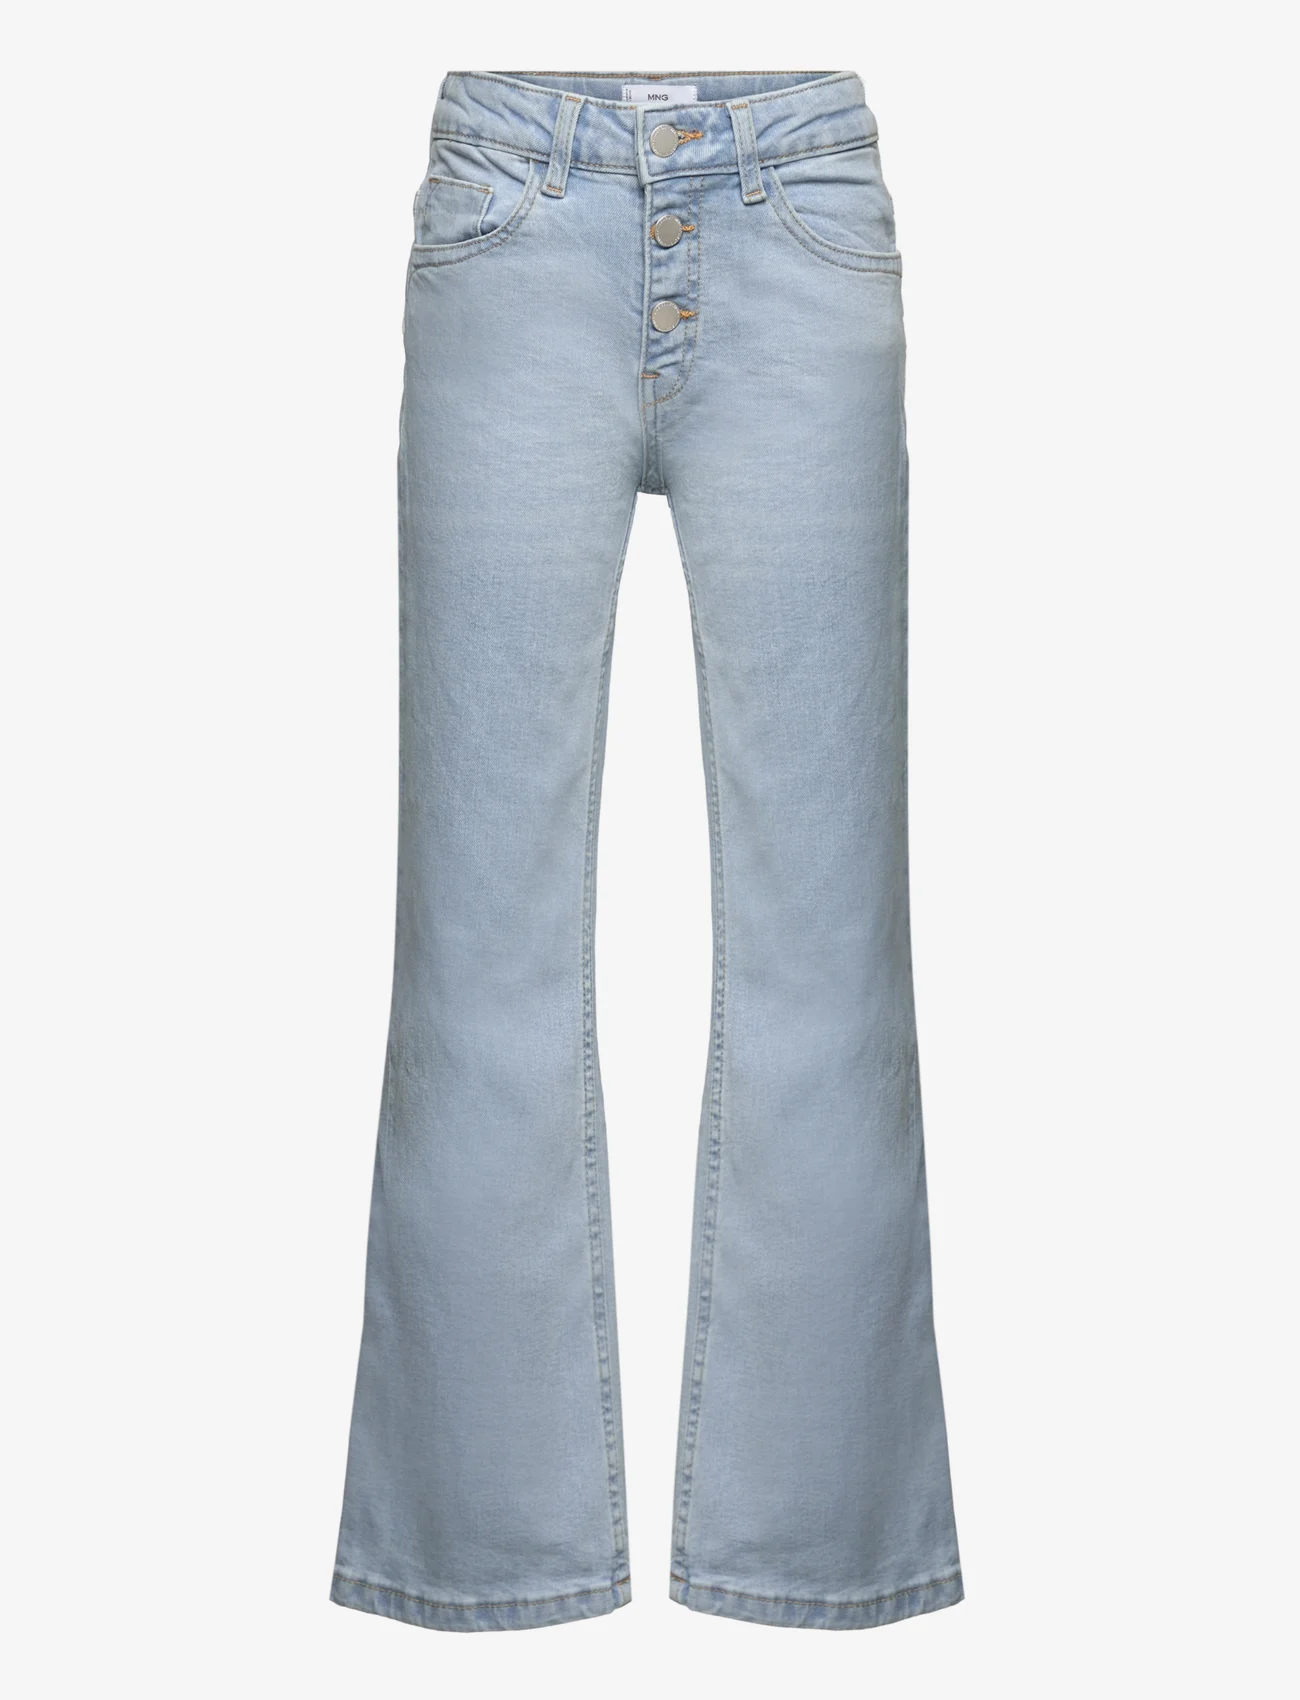 Mango - Buttons flare jeans - bootcut jeans - open blue - 0